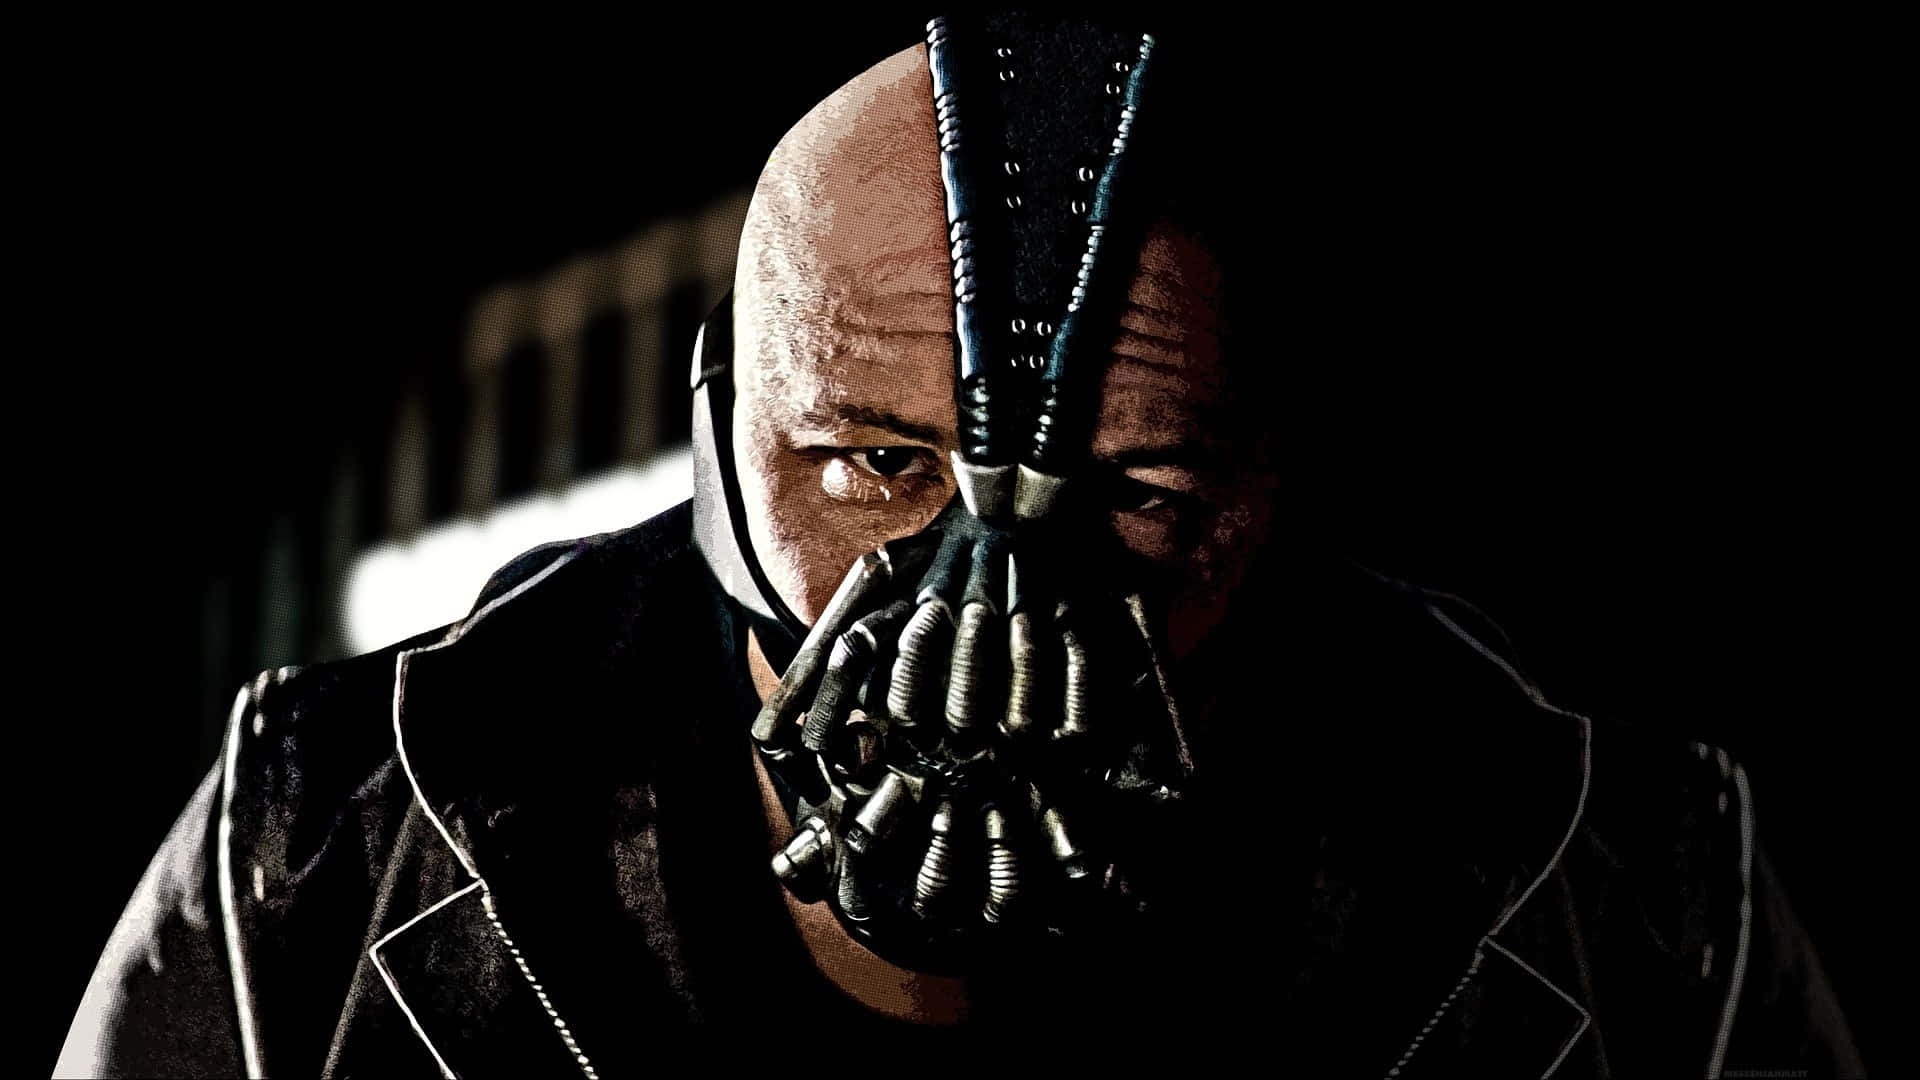 Bane broods into the night as he plans his next move against Gotham. Wallpaper